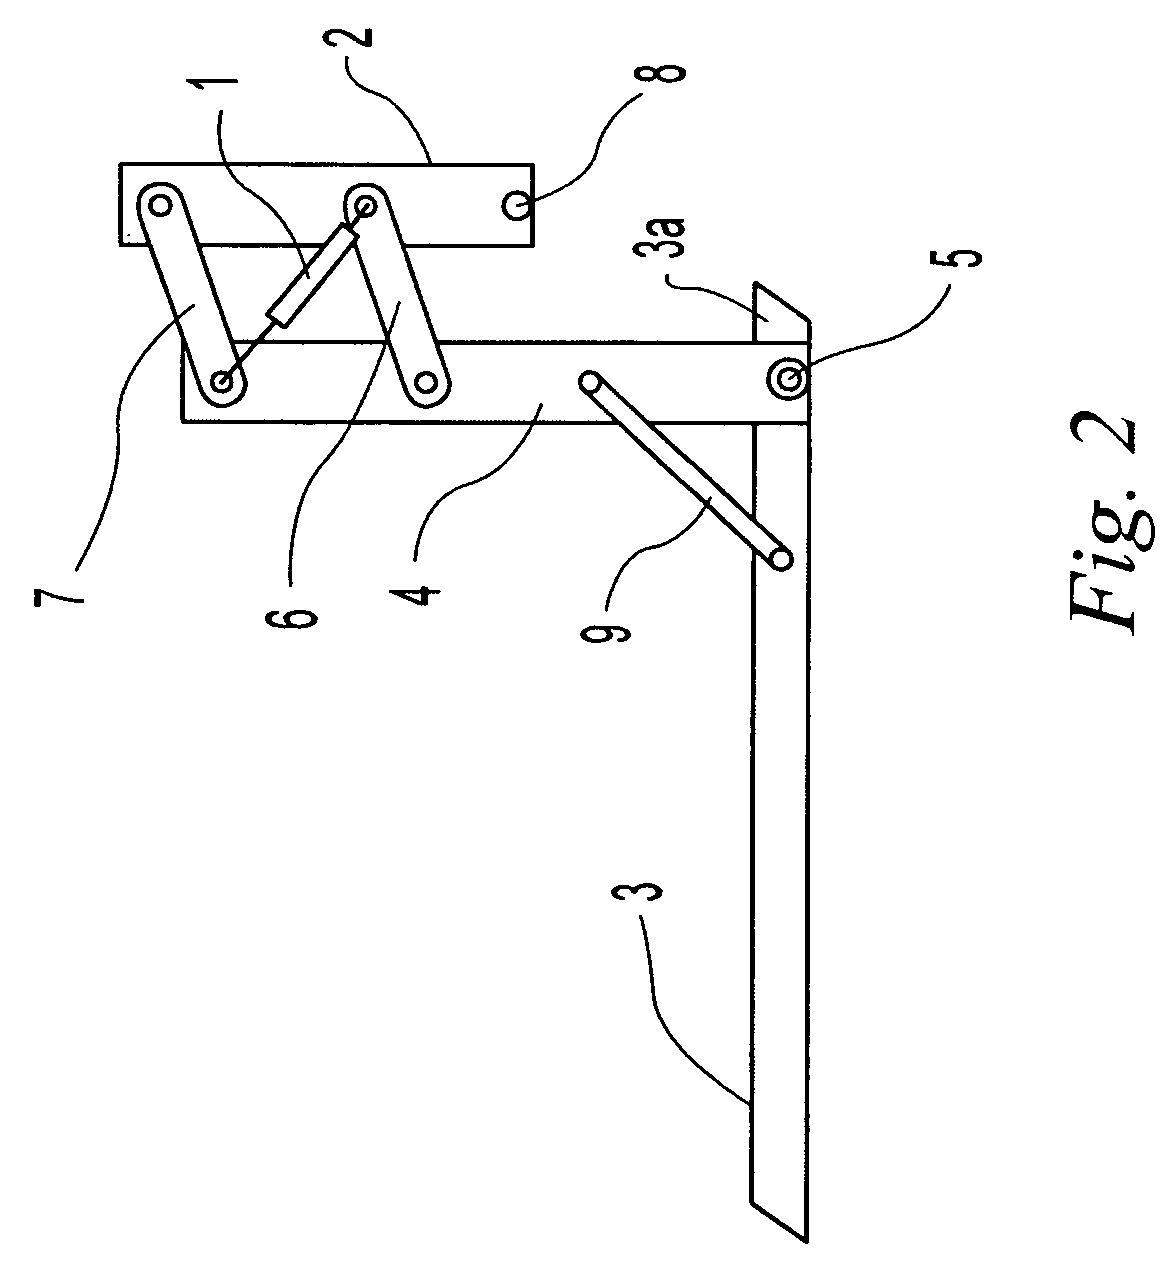 Sensing mechanical transitions from current of motor driving hydraulic pump or other mechanism